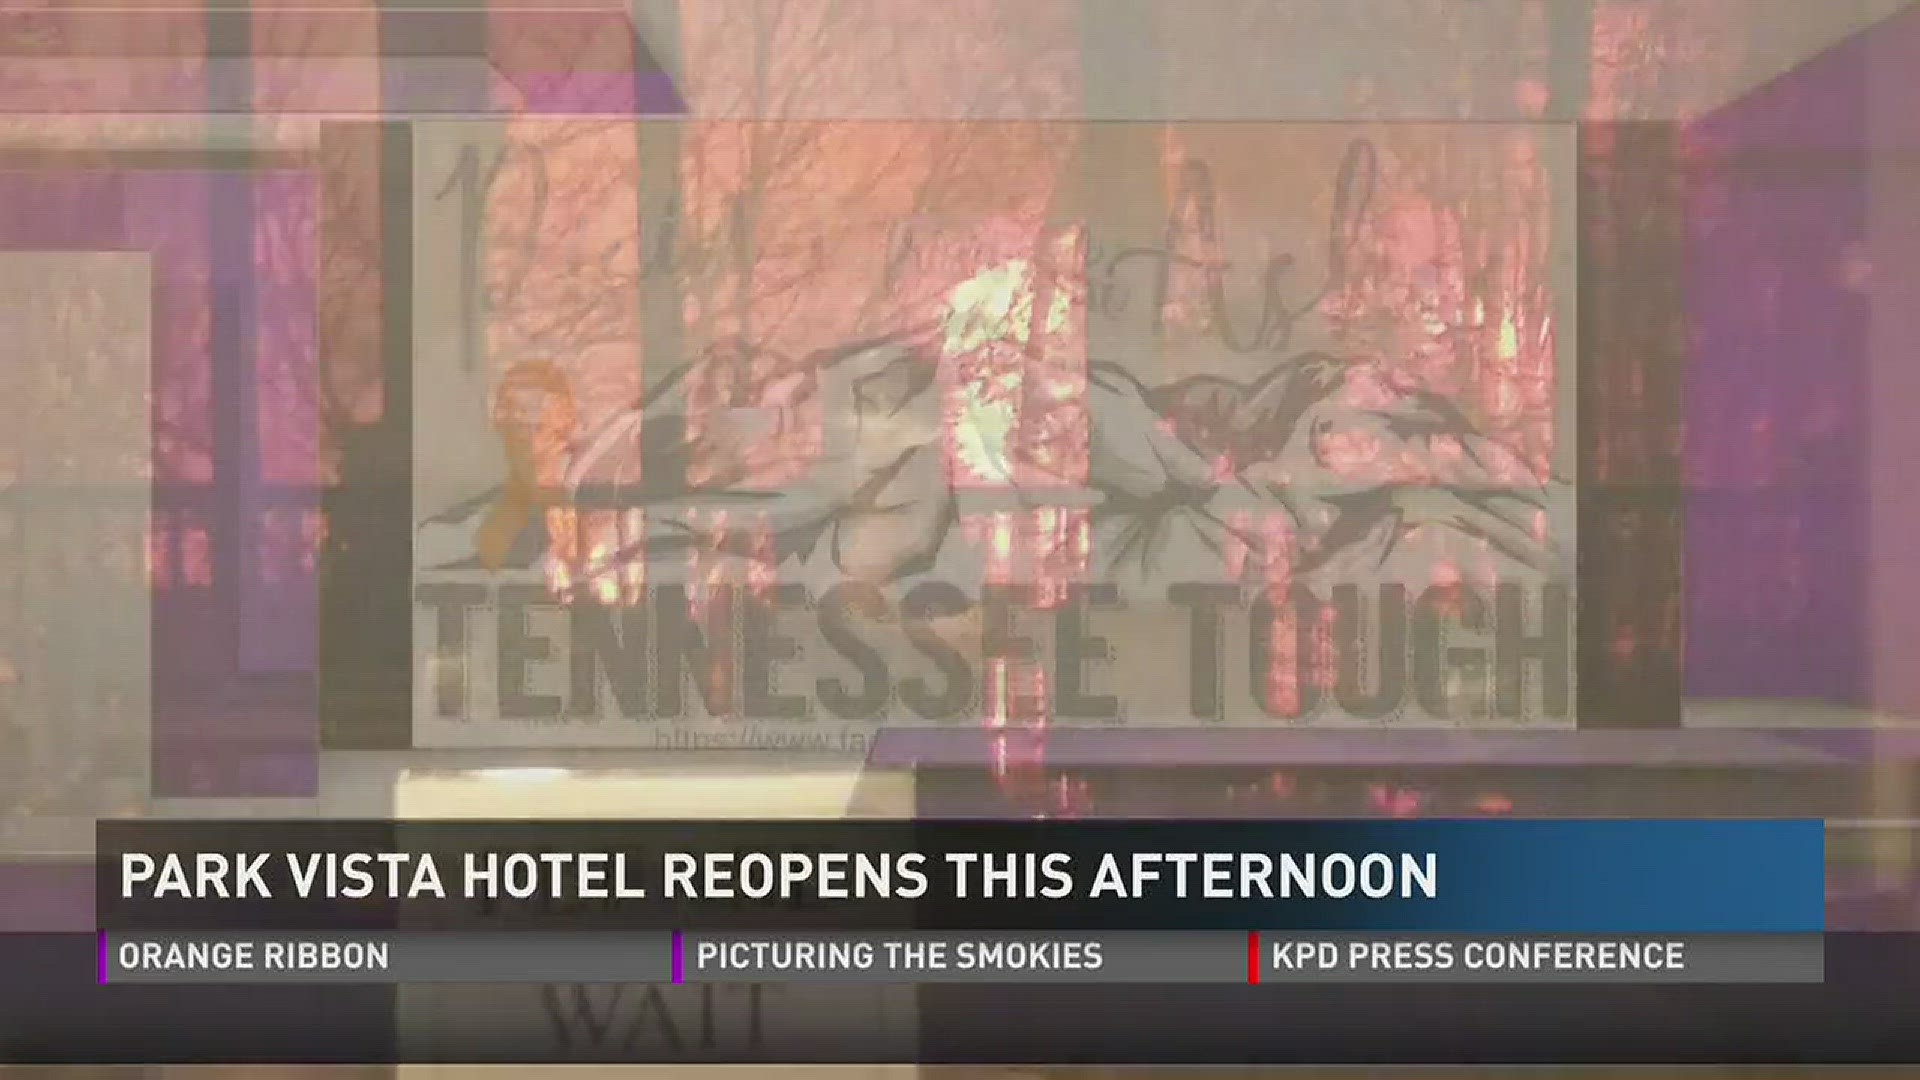 The Park Vista Hotel is reopening for business on Wednesday following the Sevier County wildfires.